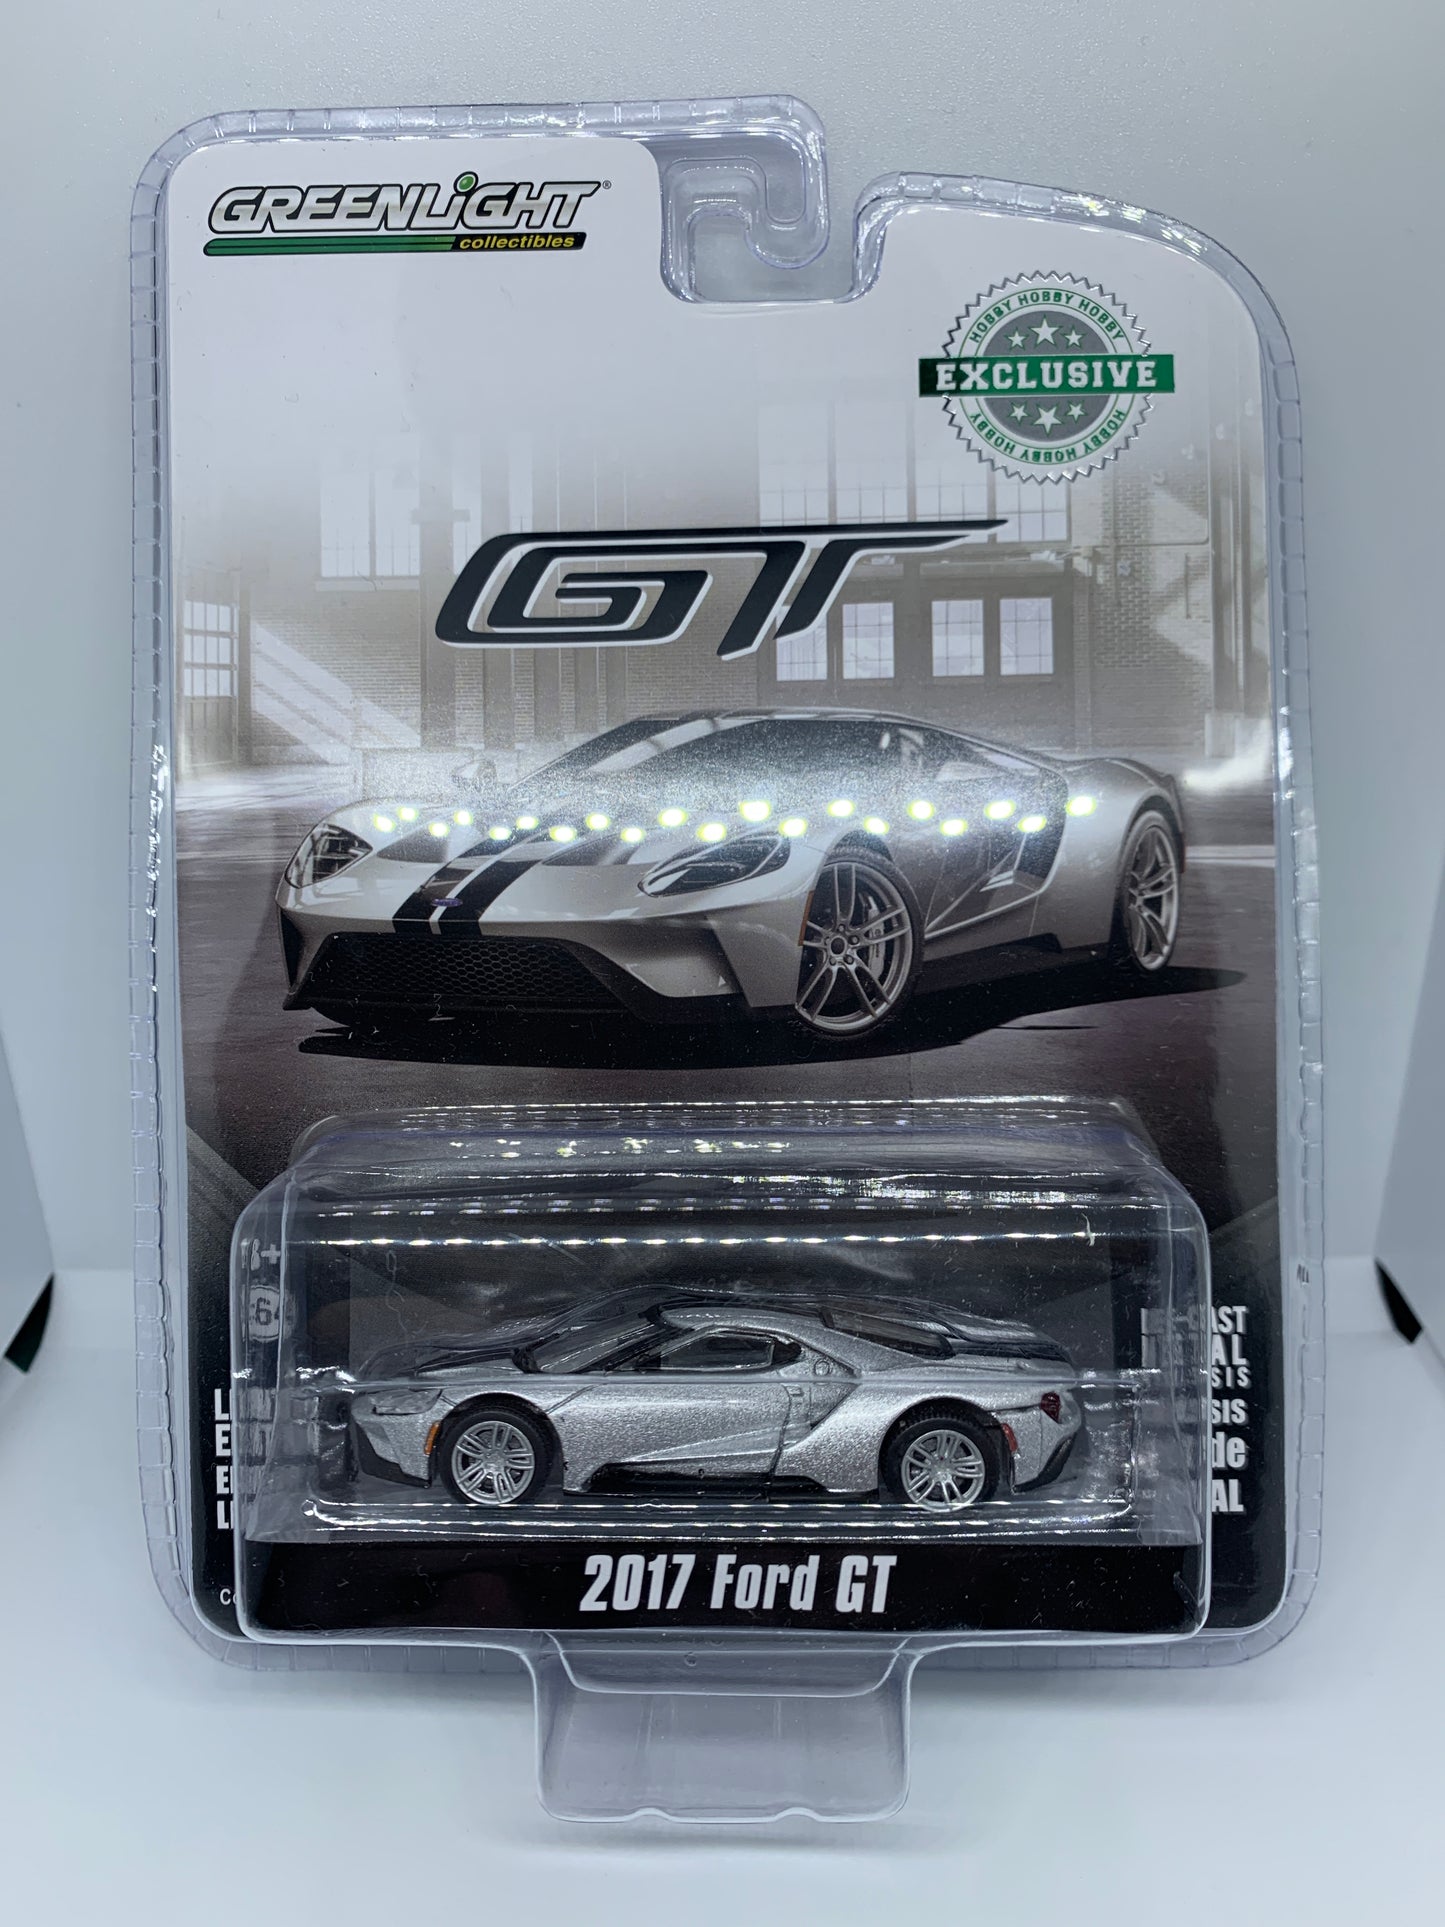 Greenlight - 2017 Ford GT - Hobby Lobby Exclusive